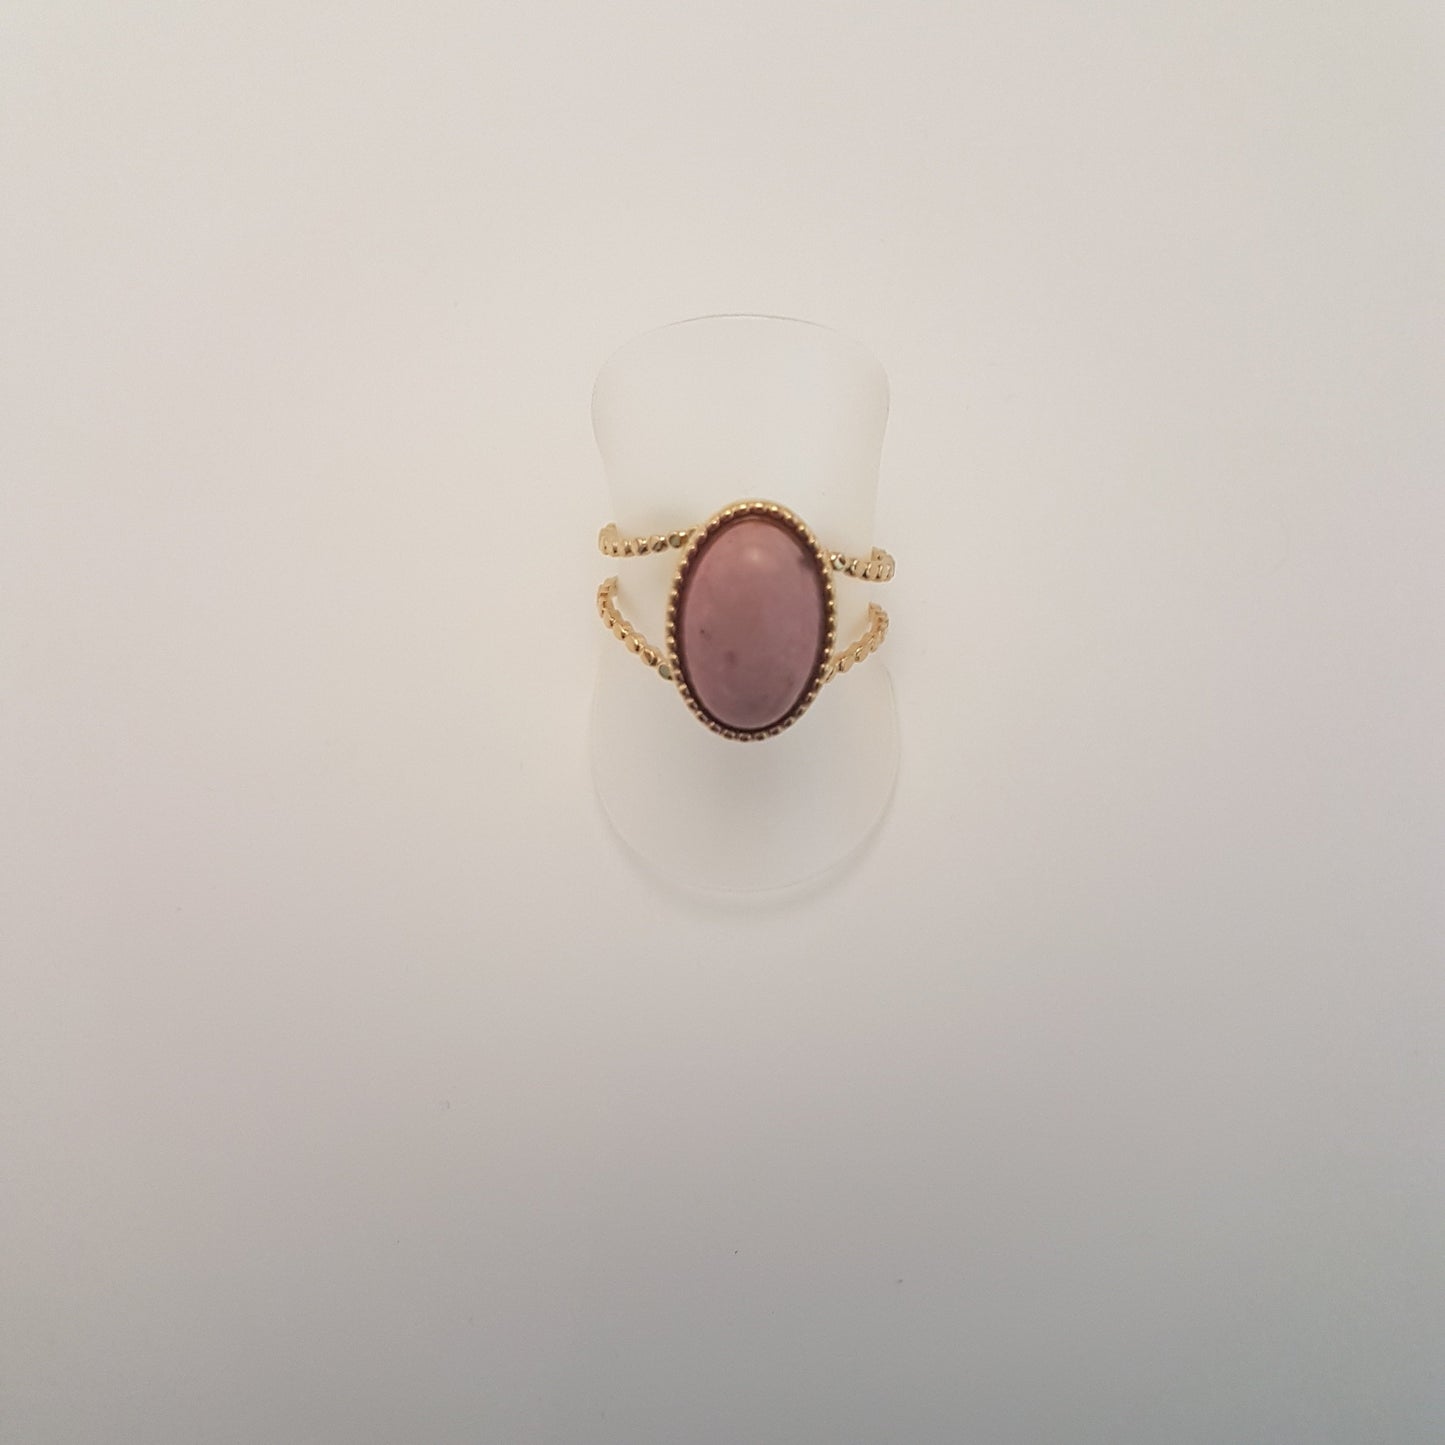 adjustable ring with rodhonite stone